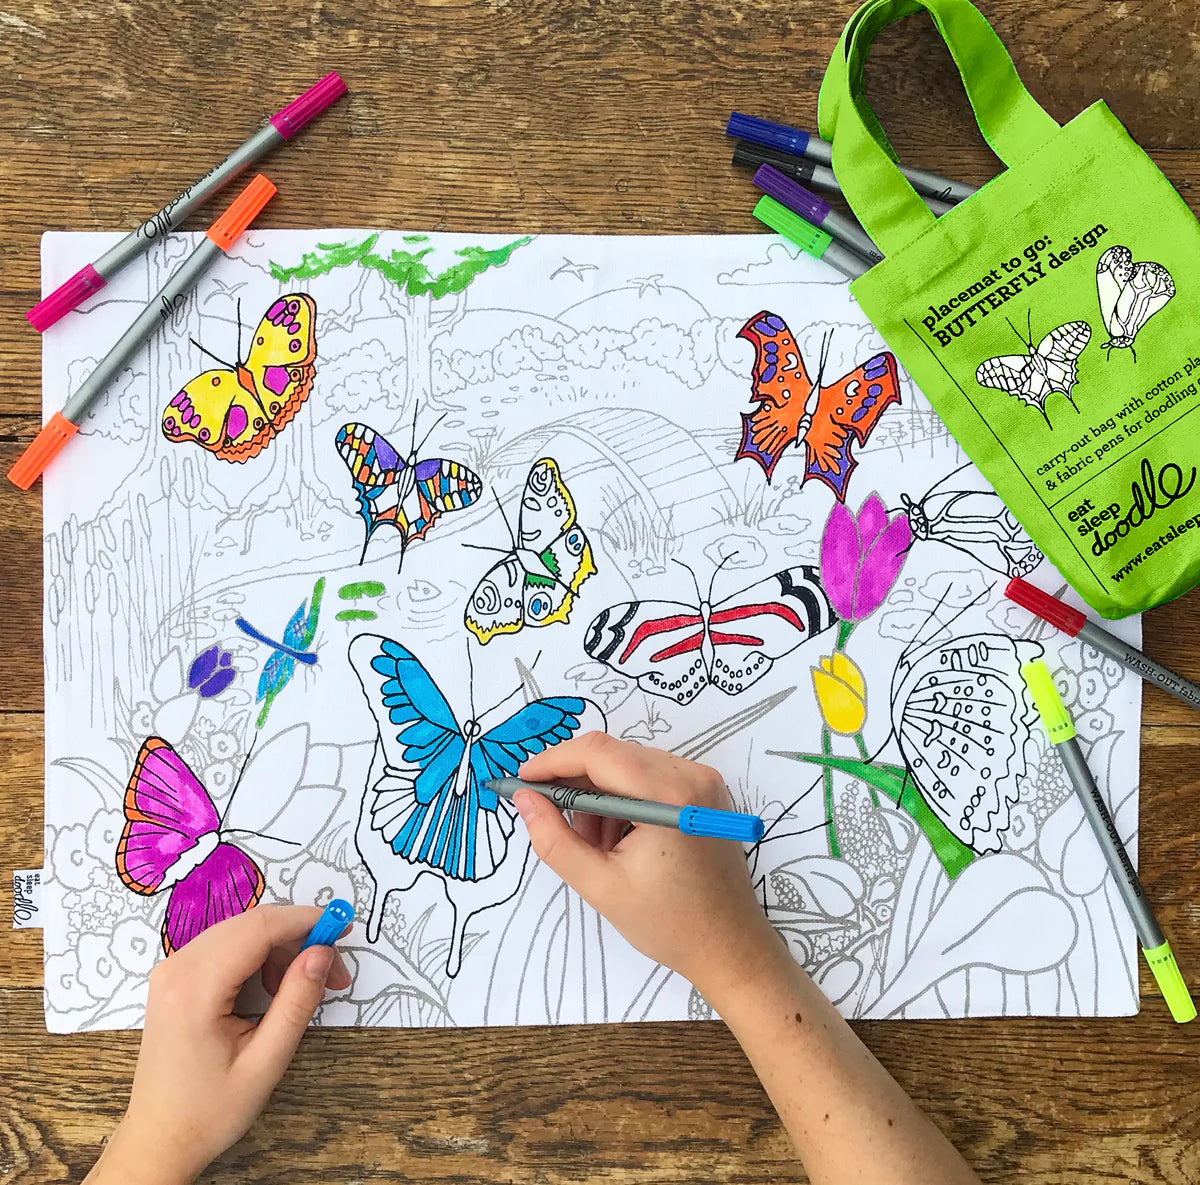 Fab Gifts | Eat Sleep Doodle Placemat Butterfly by Weirs of Baggot Street